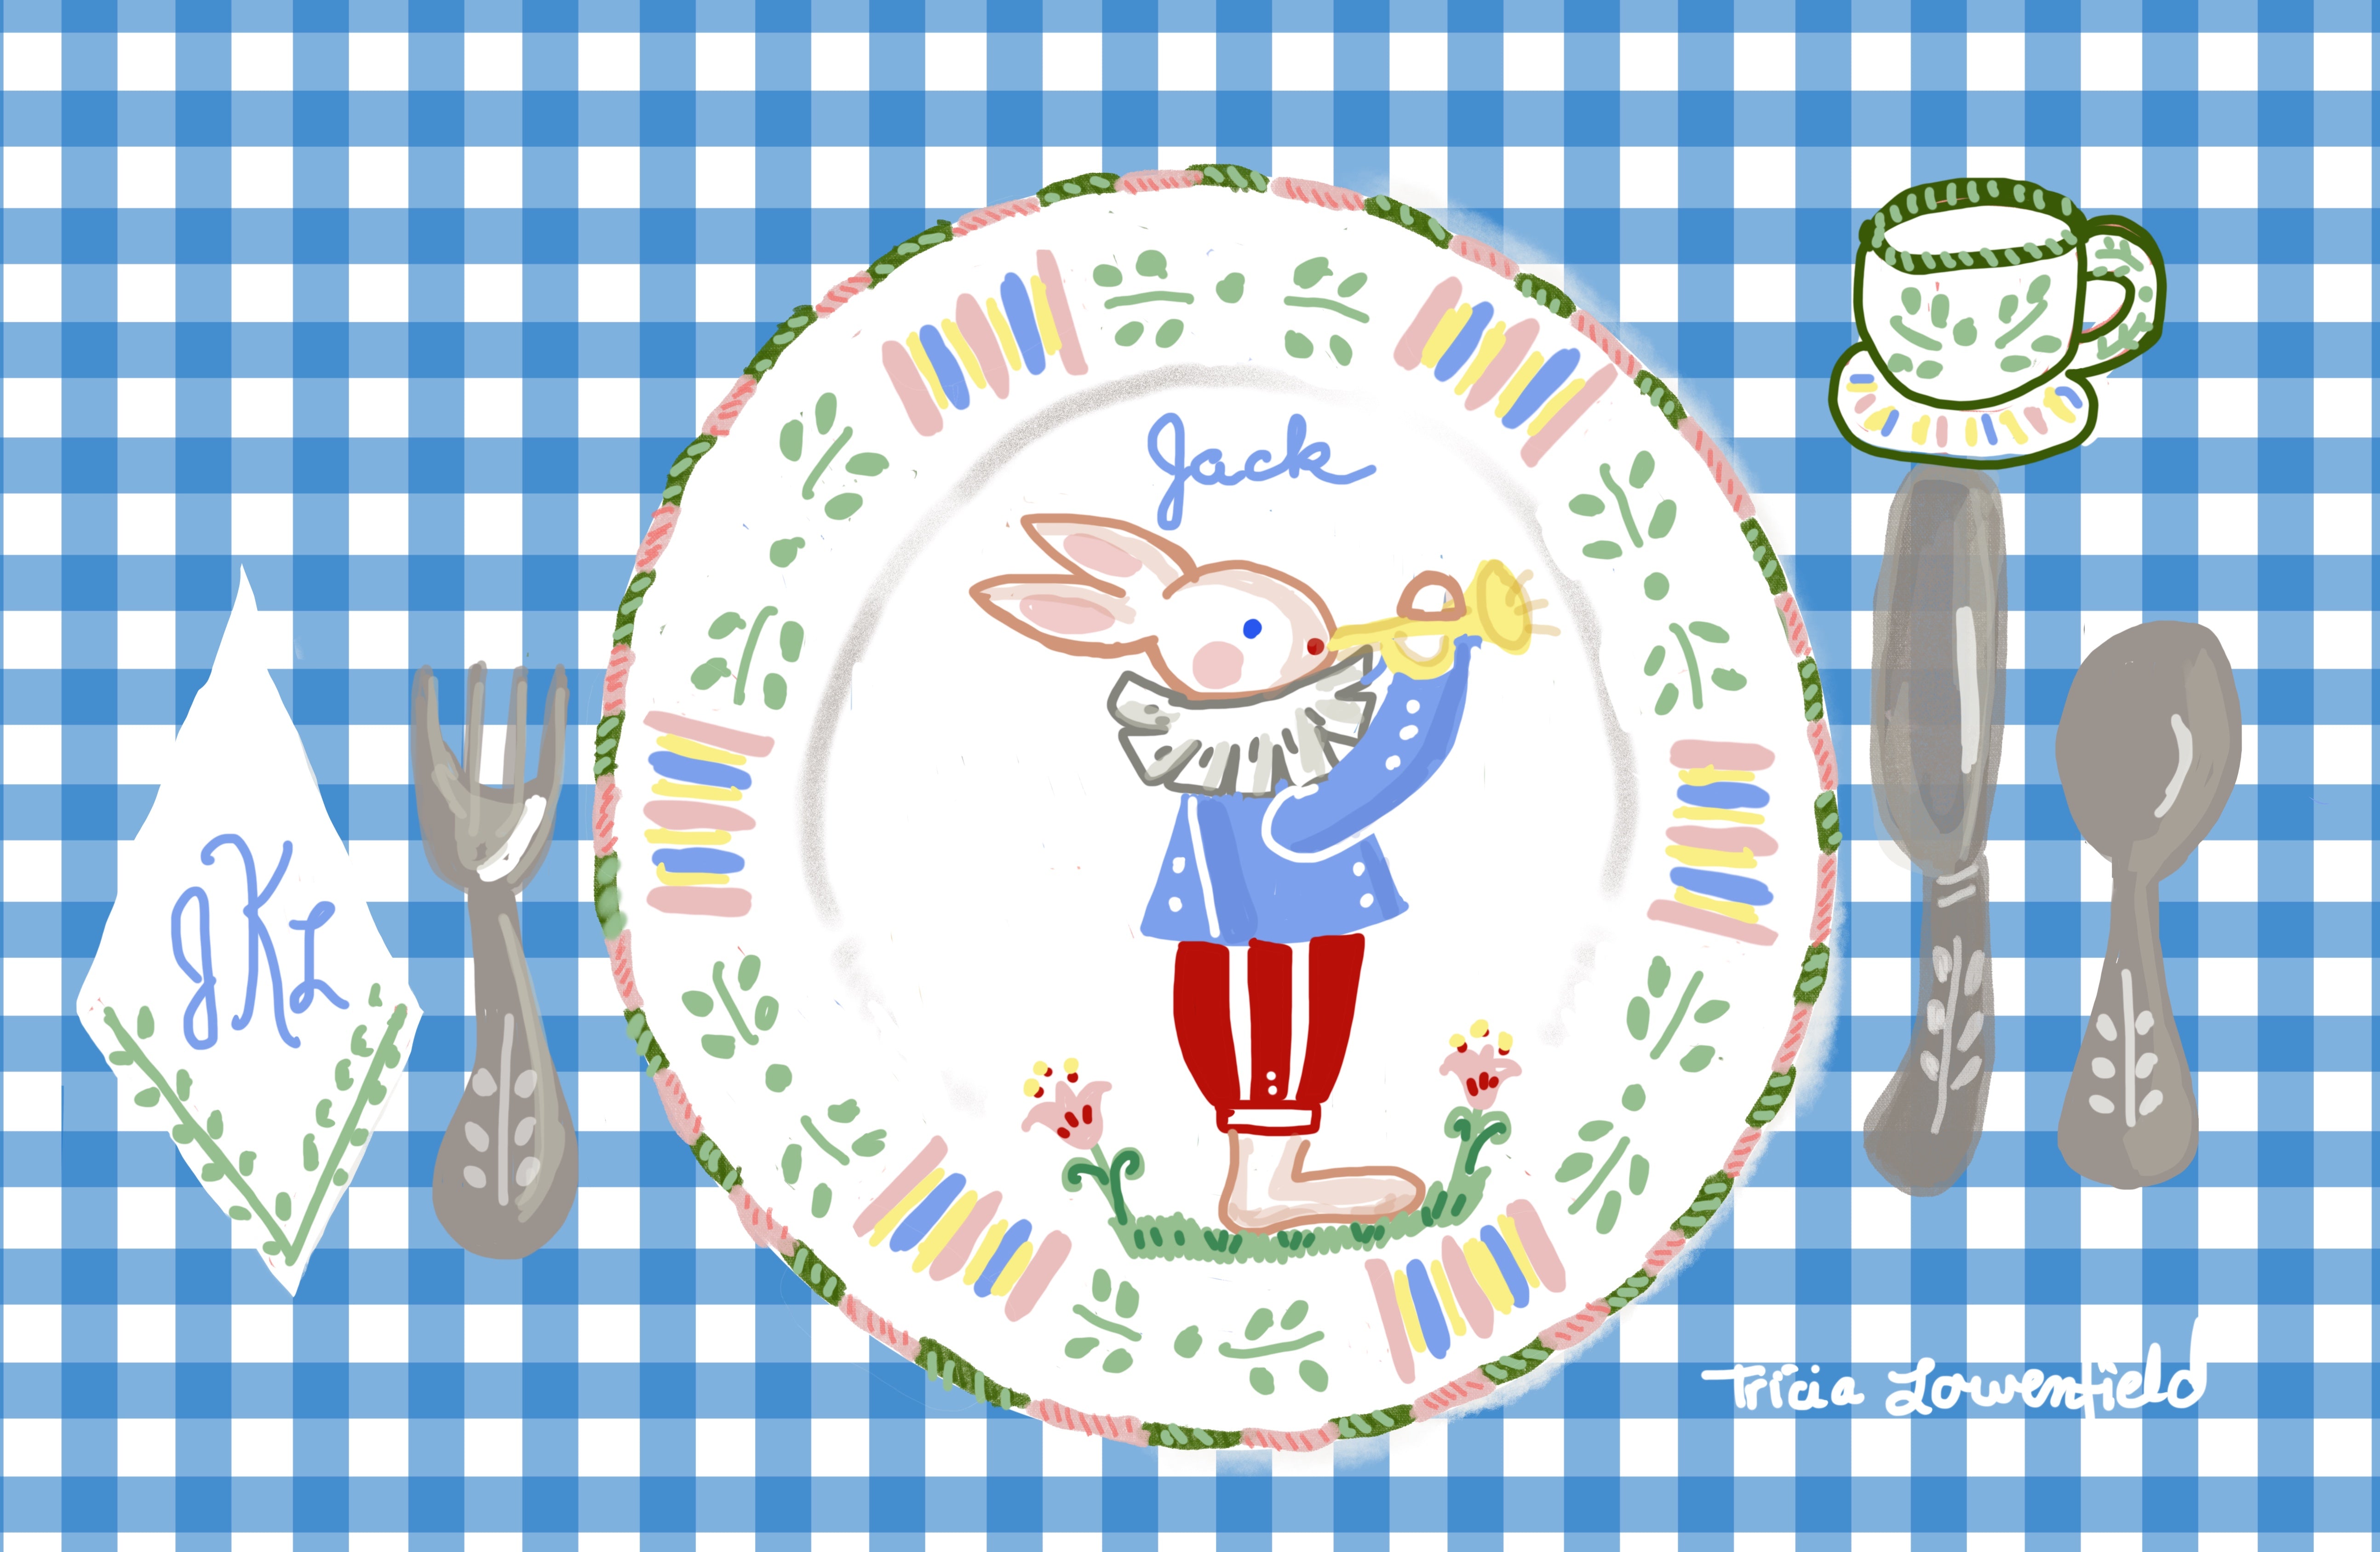 Blue Gingham Troubadour Bunny Placemat (personalized) - Premium Placemat from Tricia Lowenfield Shop 